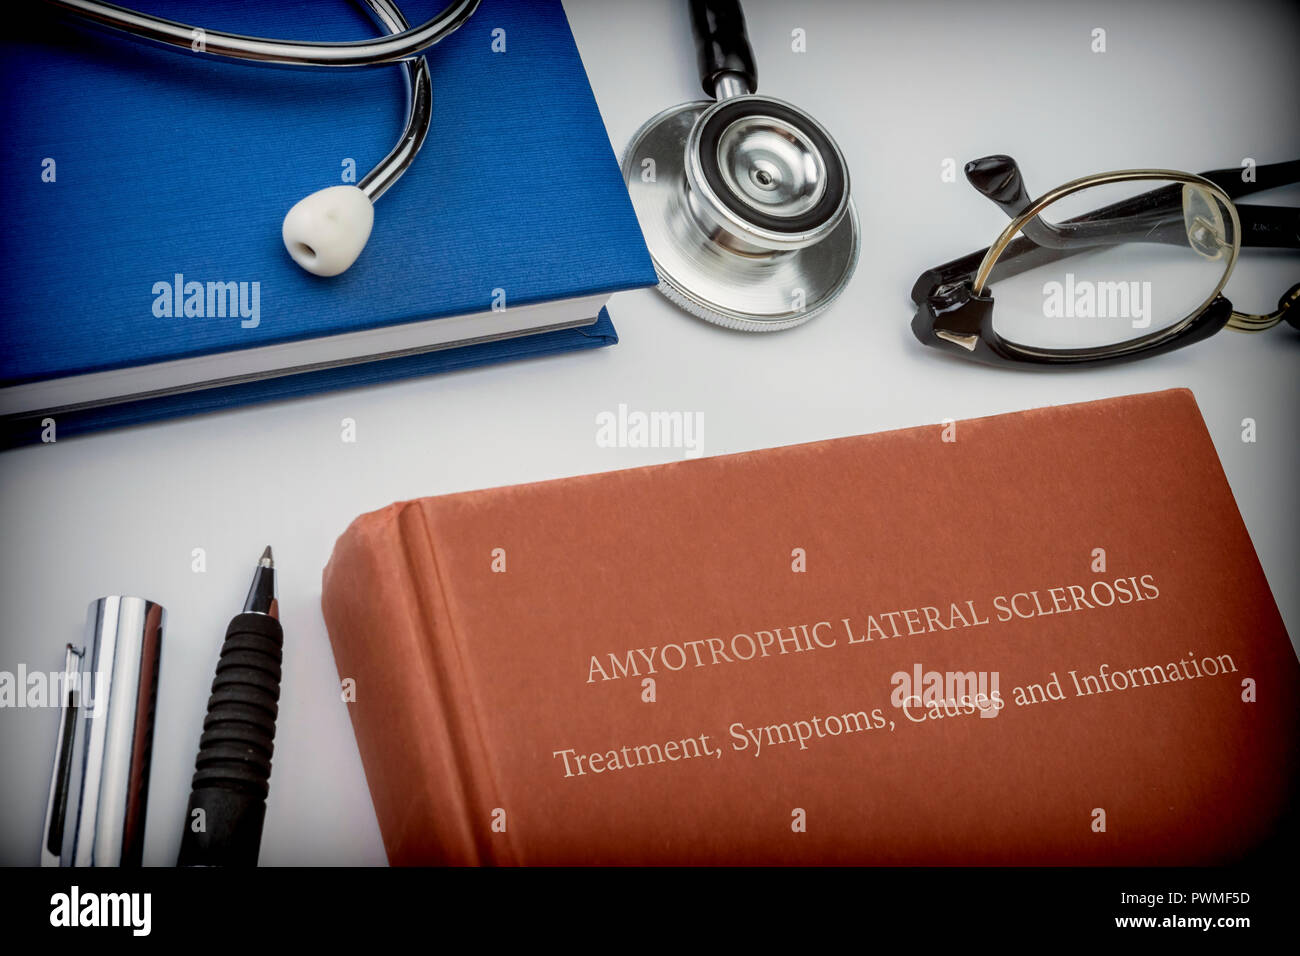 Titled book Amyotrophic Lateral Sclerosis along with medical equipment, conceptual image Stock Photo